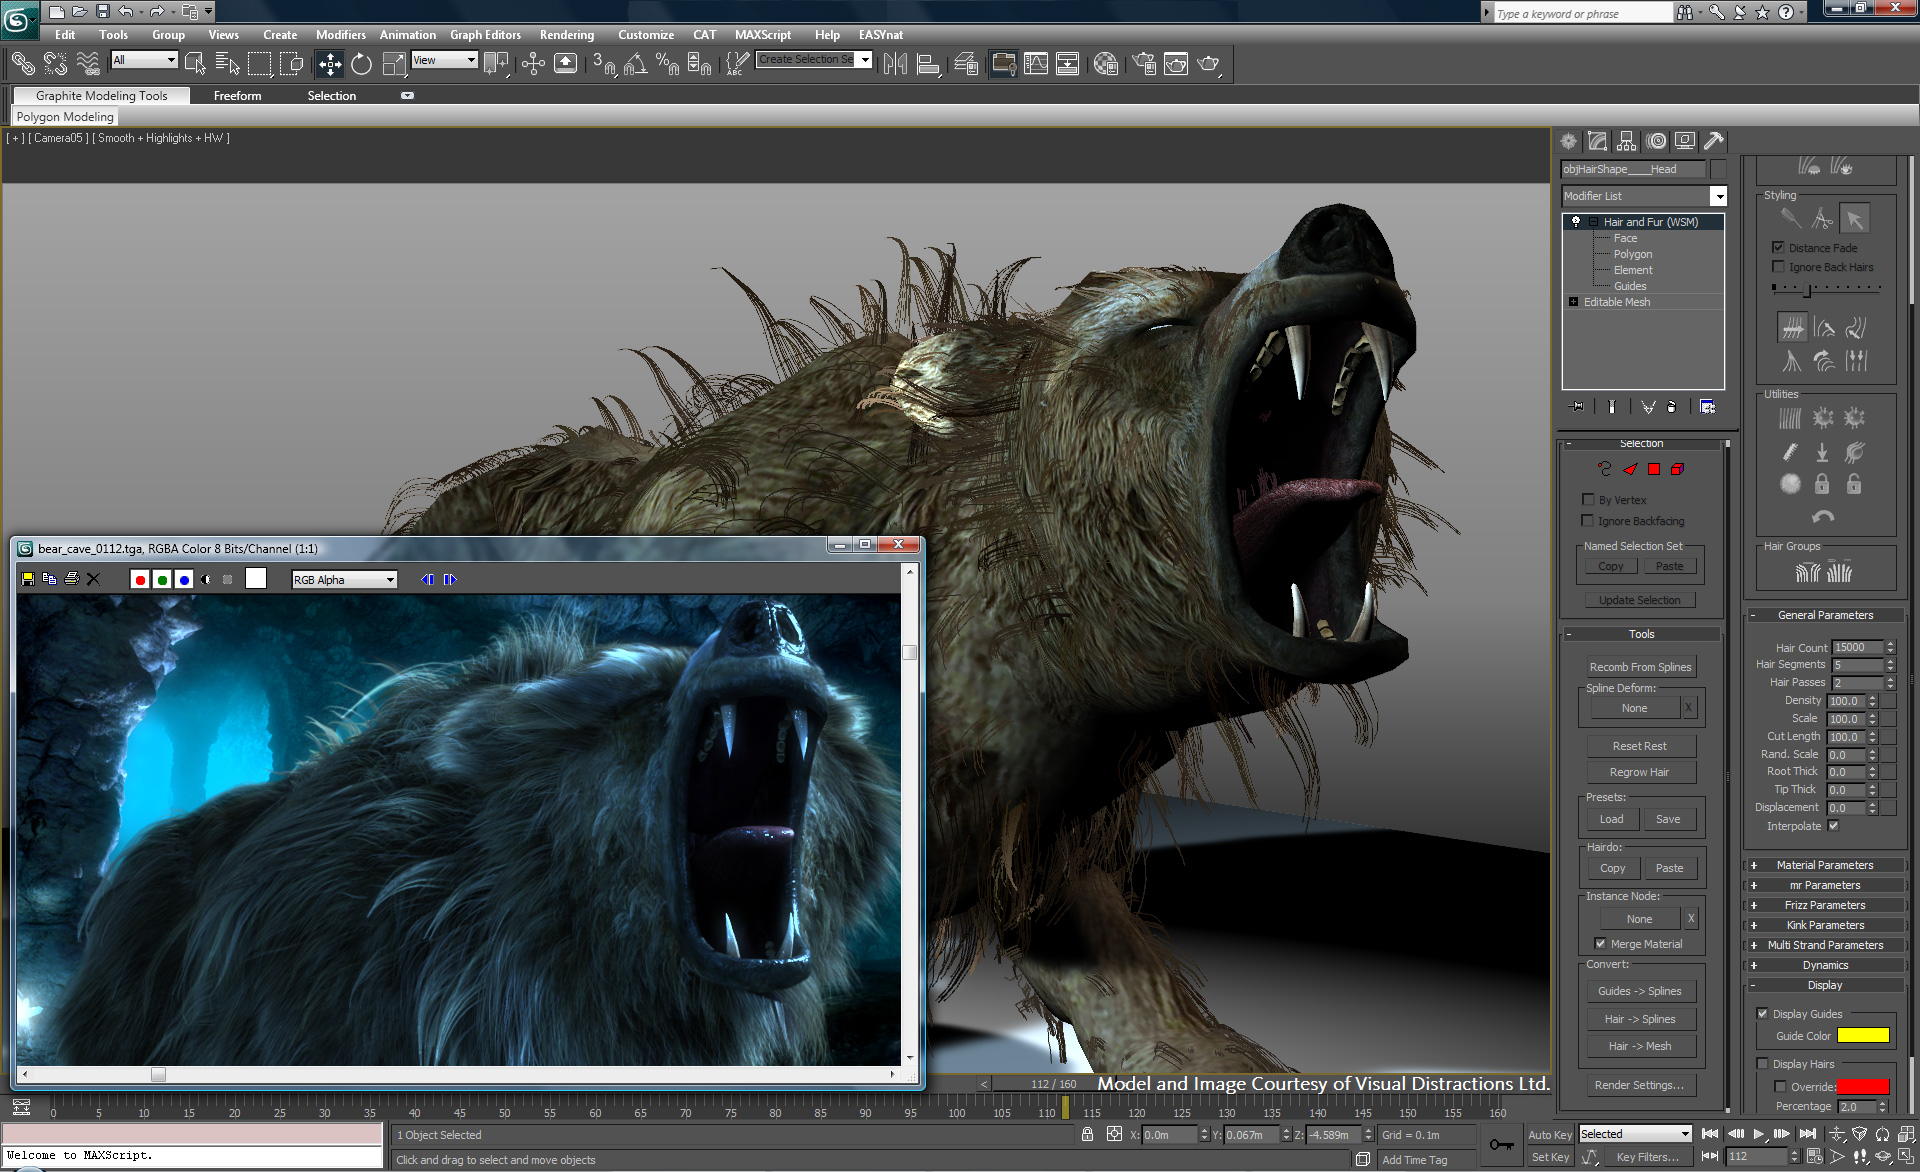 Using tools for the hair and fur on this bear.